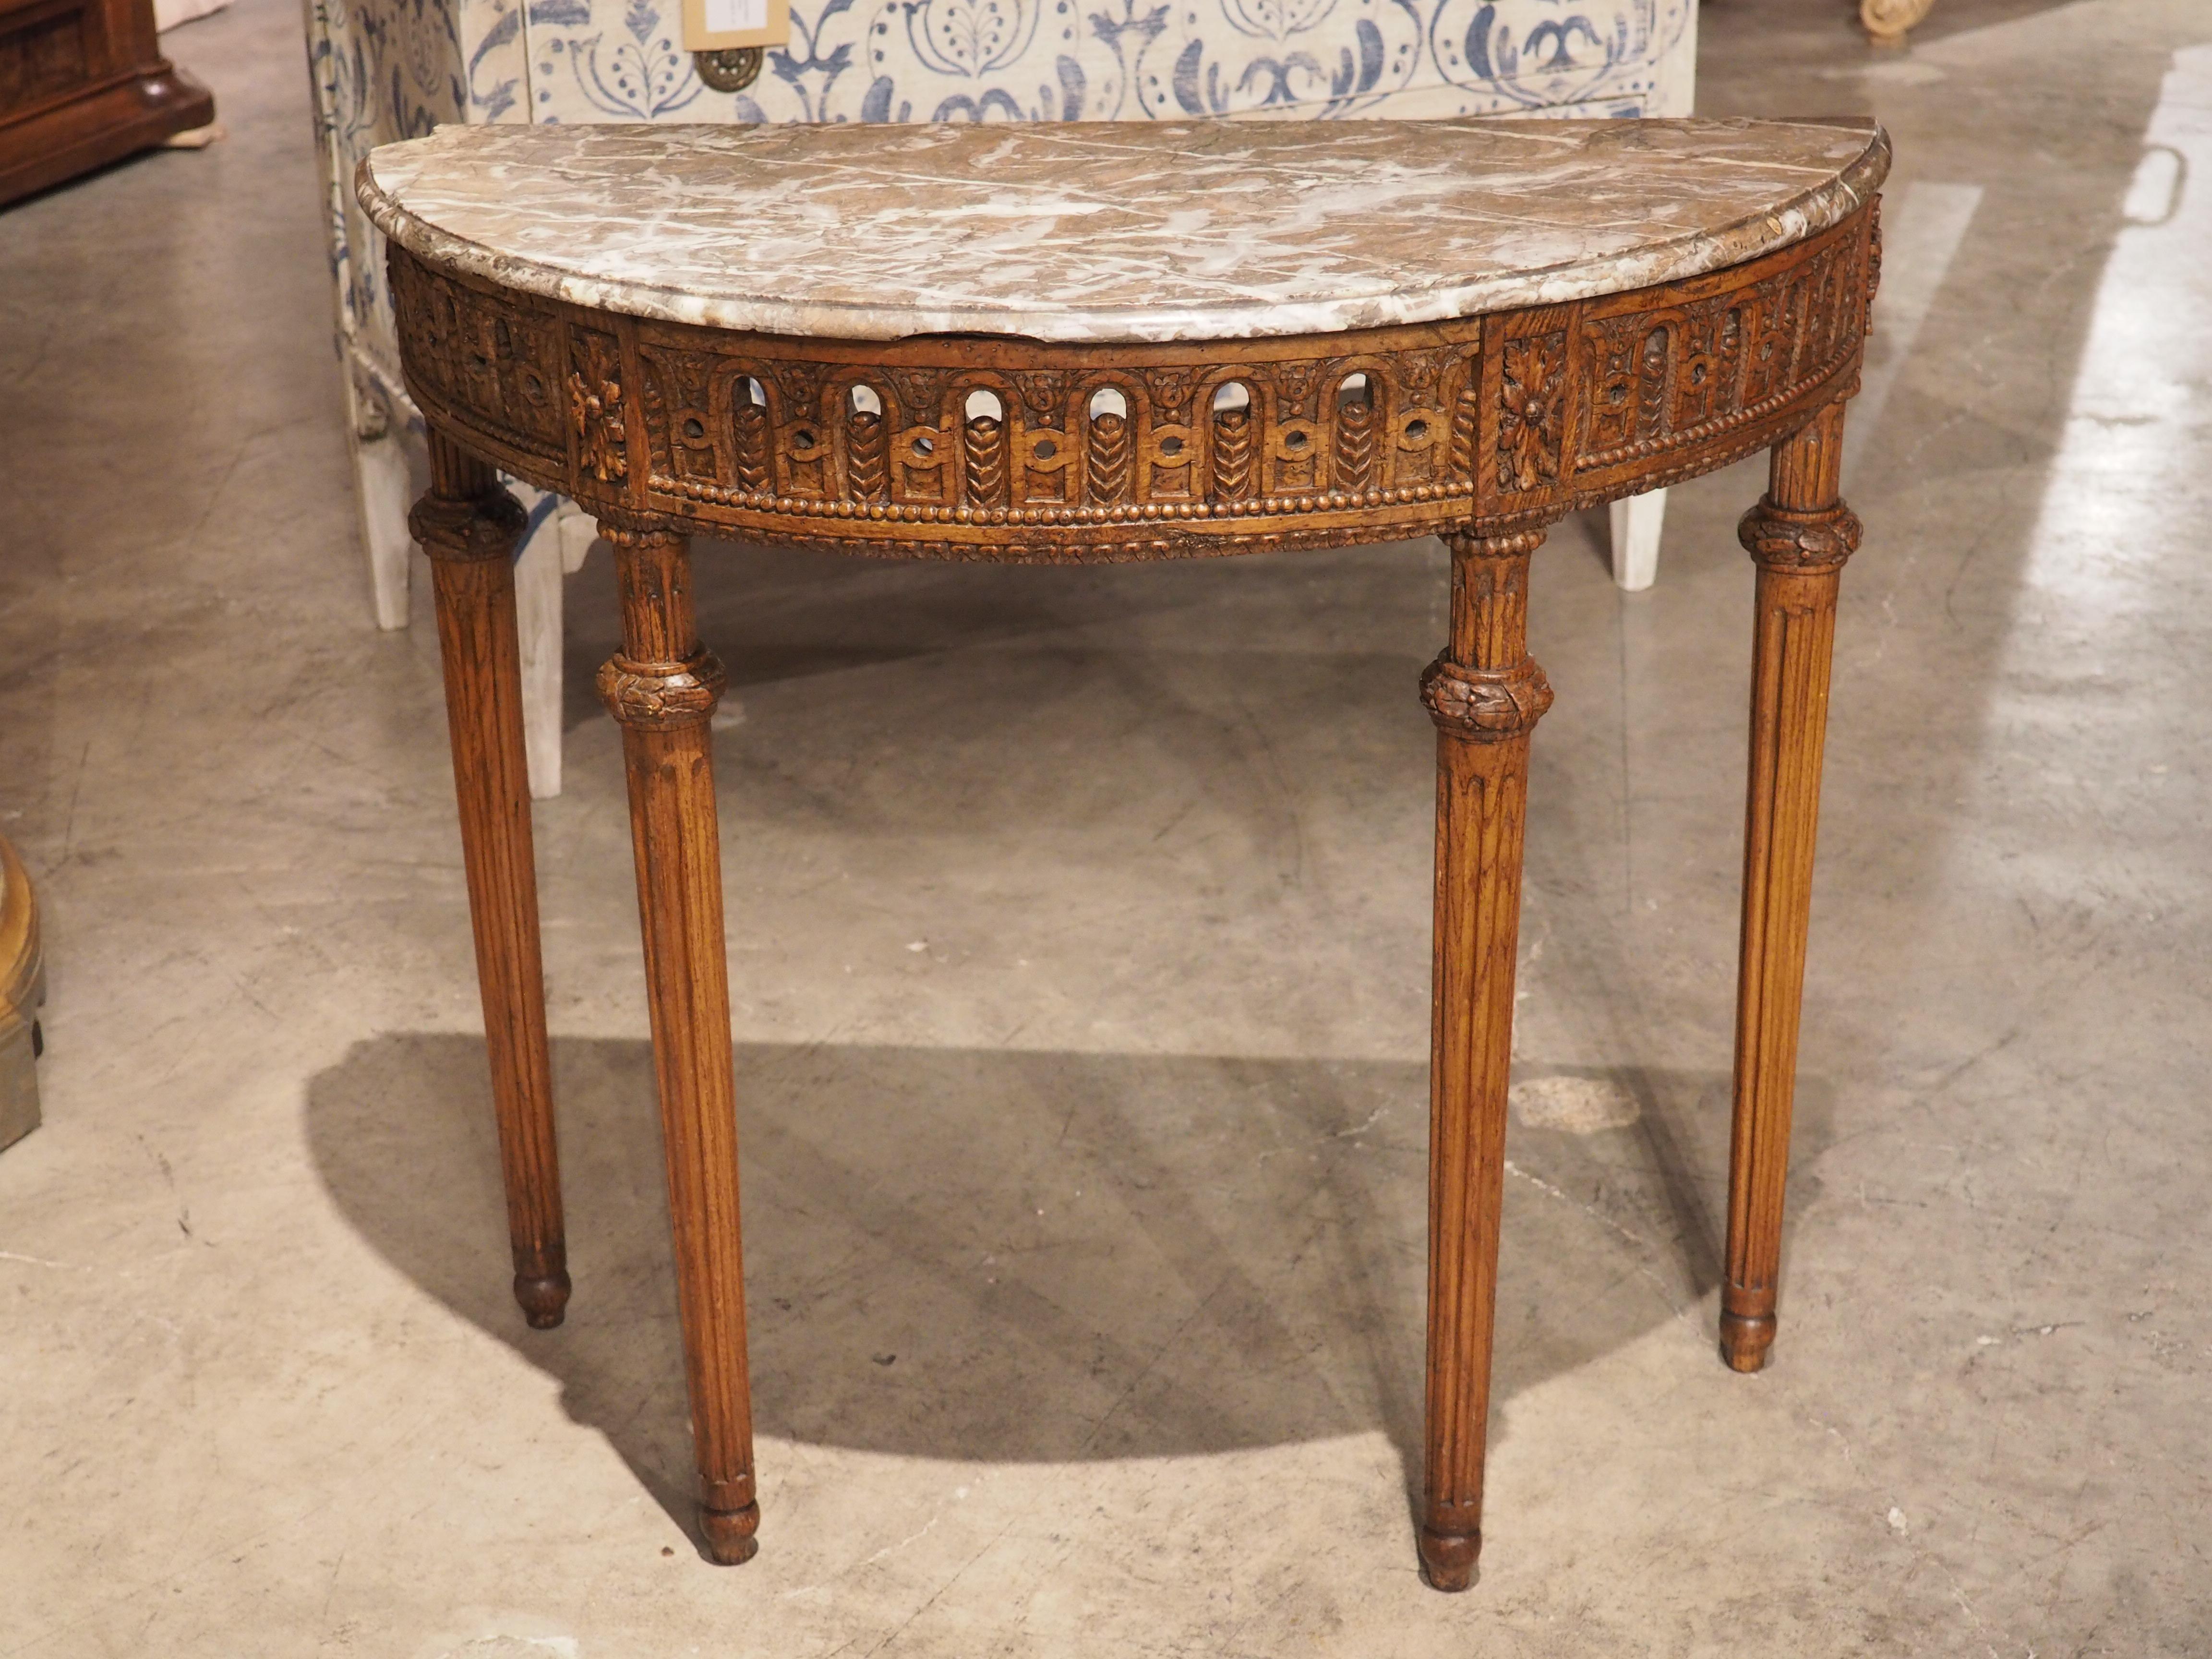 Period French Louis XVI Carved Oak and Marble Demi Lune Console Table, C. 1785 For Sale 14